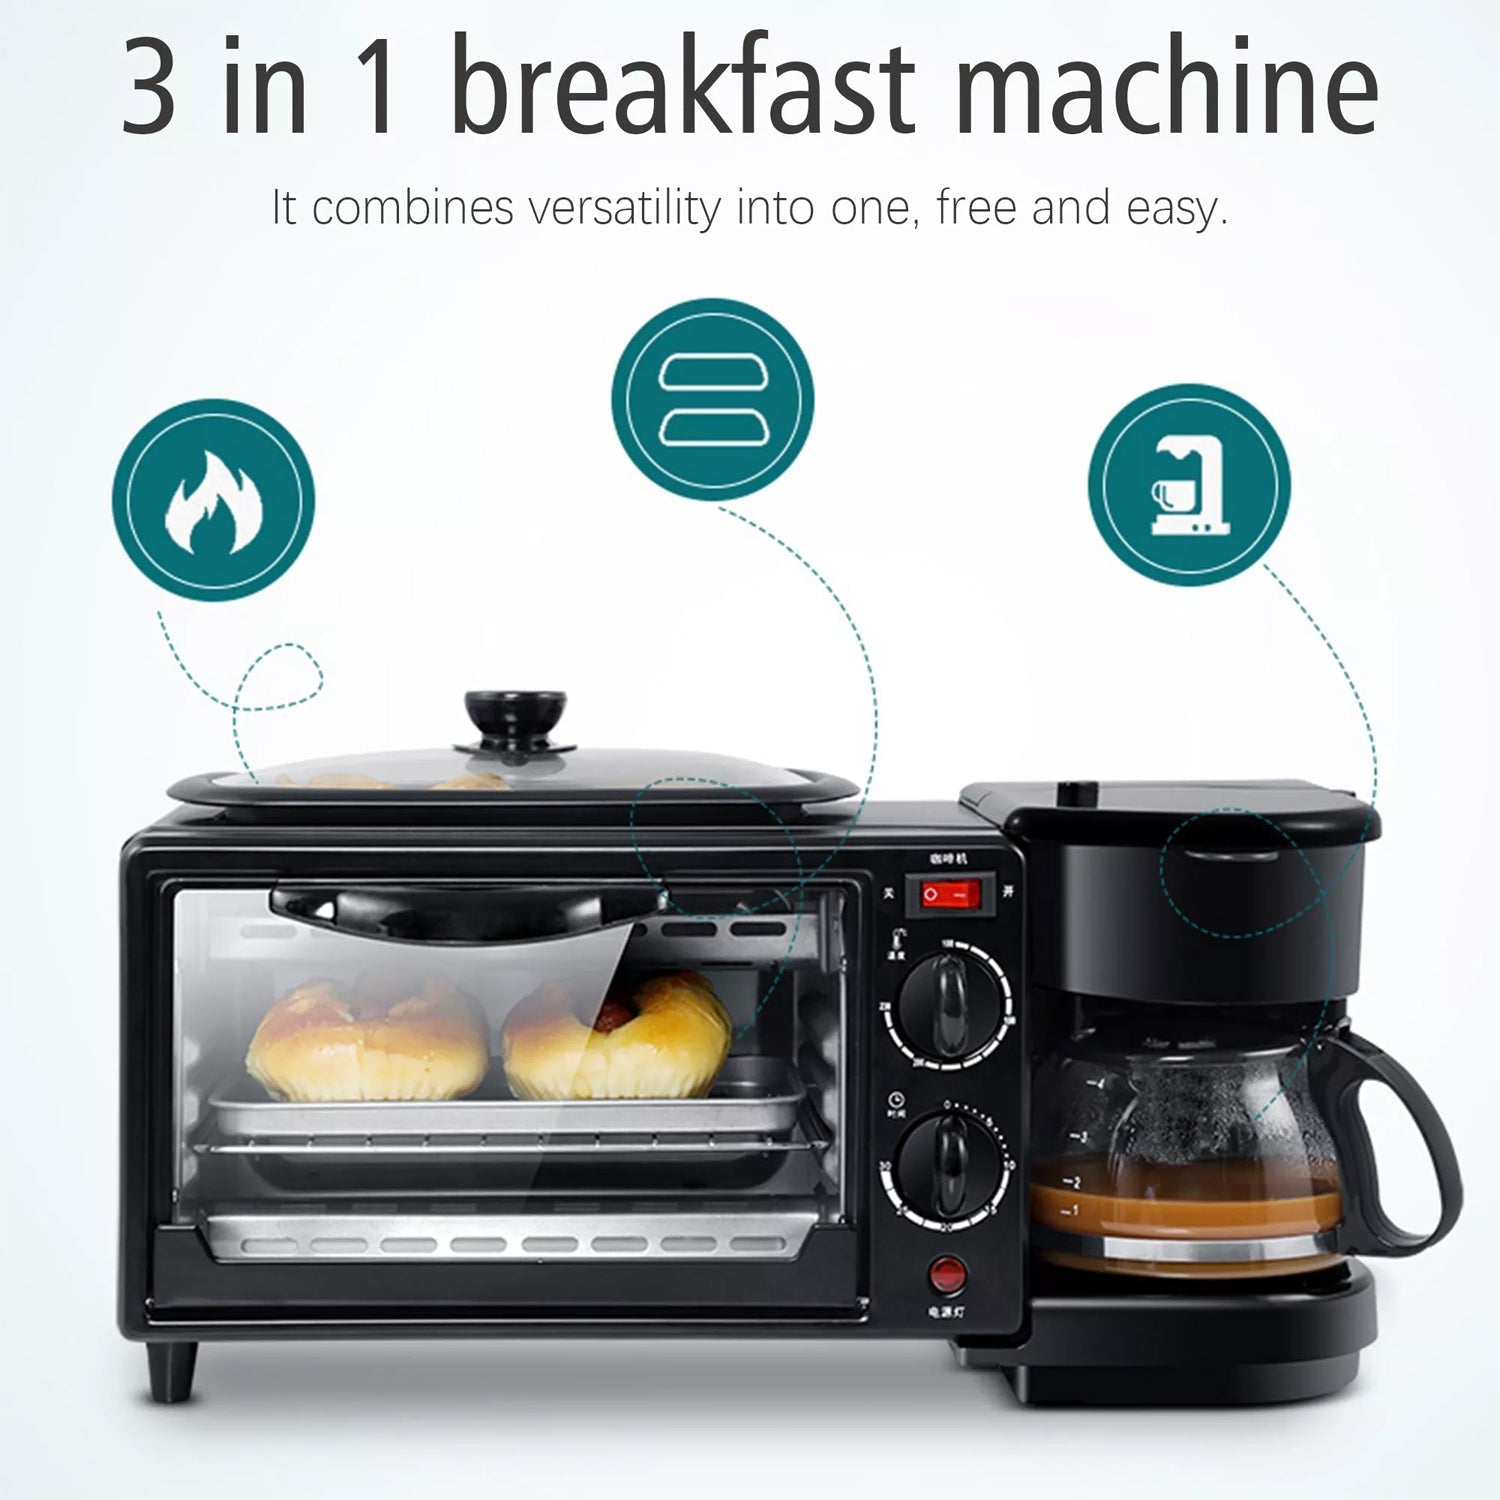 2788 3 in 1 Breakfast Maker Portable Toaster Oven, Grill Pan & Coffee Maker Full Breakfast Ready at One Go DeoDap